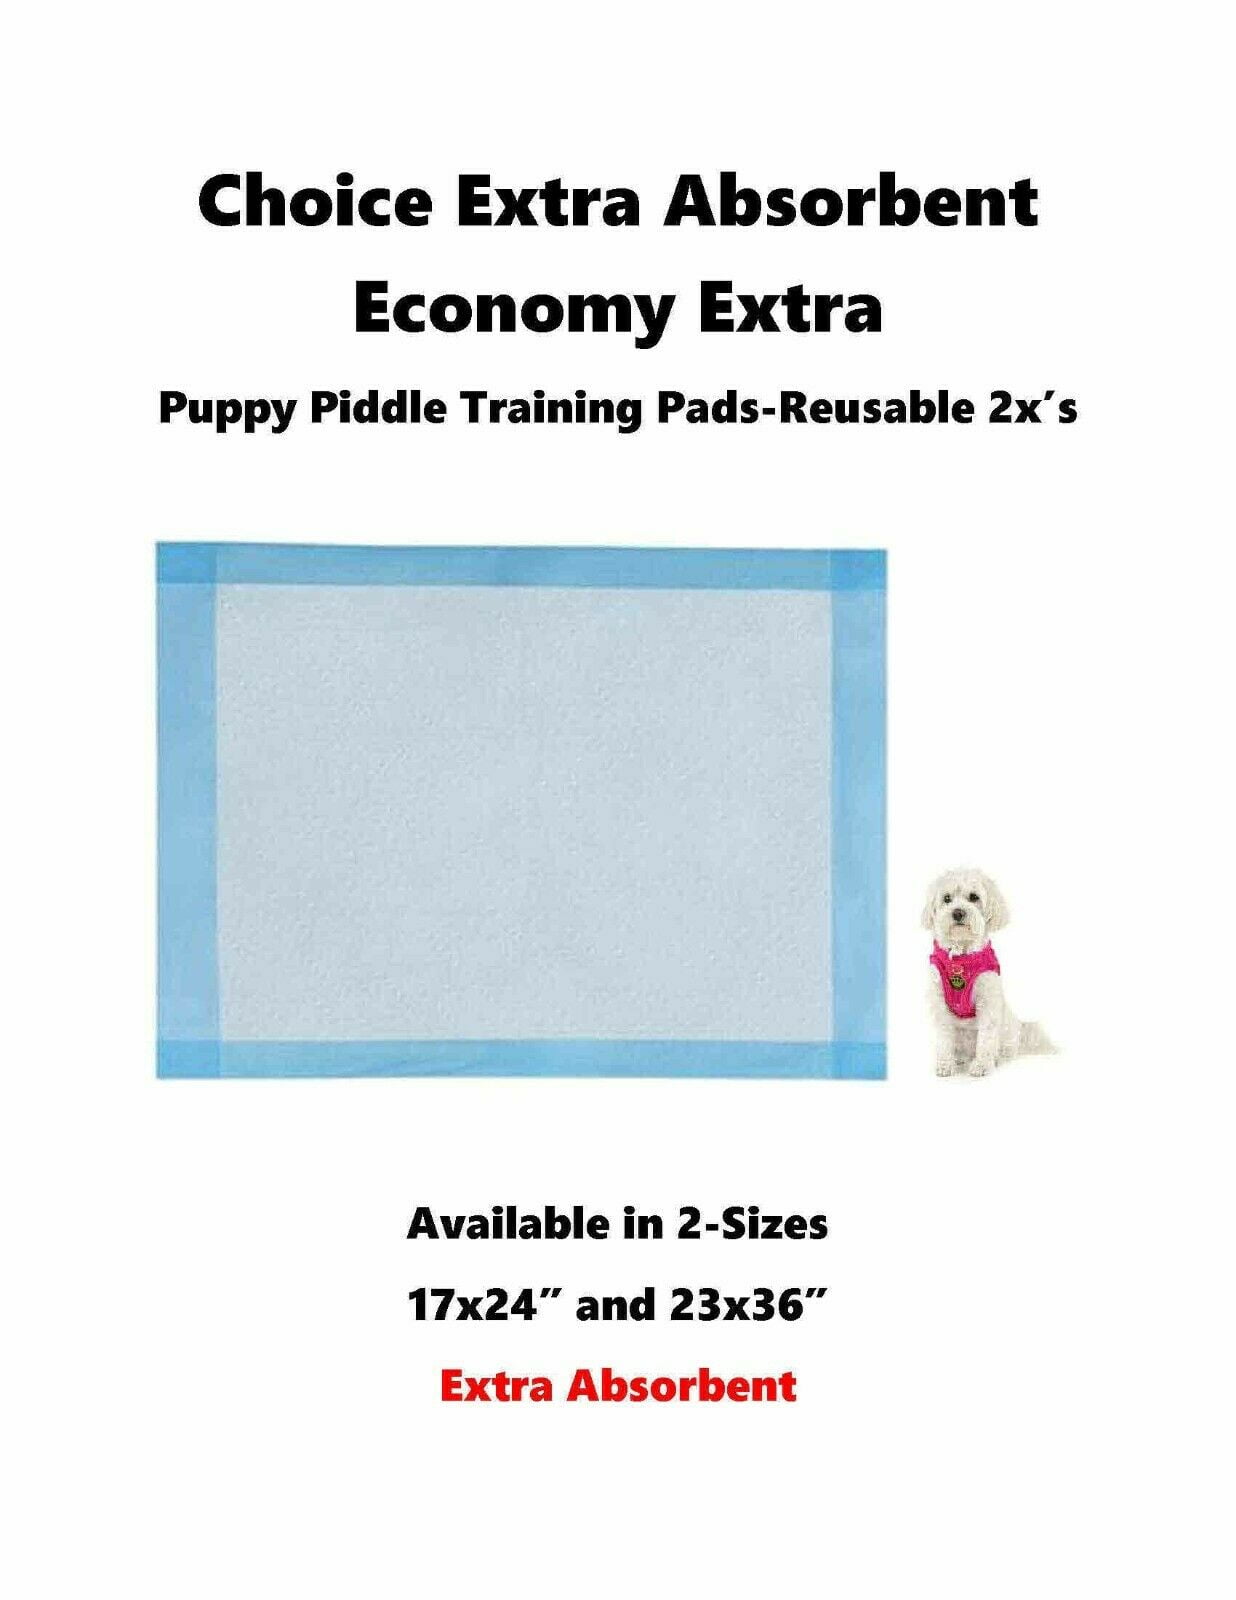 Cheap-Pads Low Cost Economy Puppy Training/Under Pads 17x24"-23x24"-23x36"